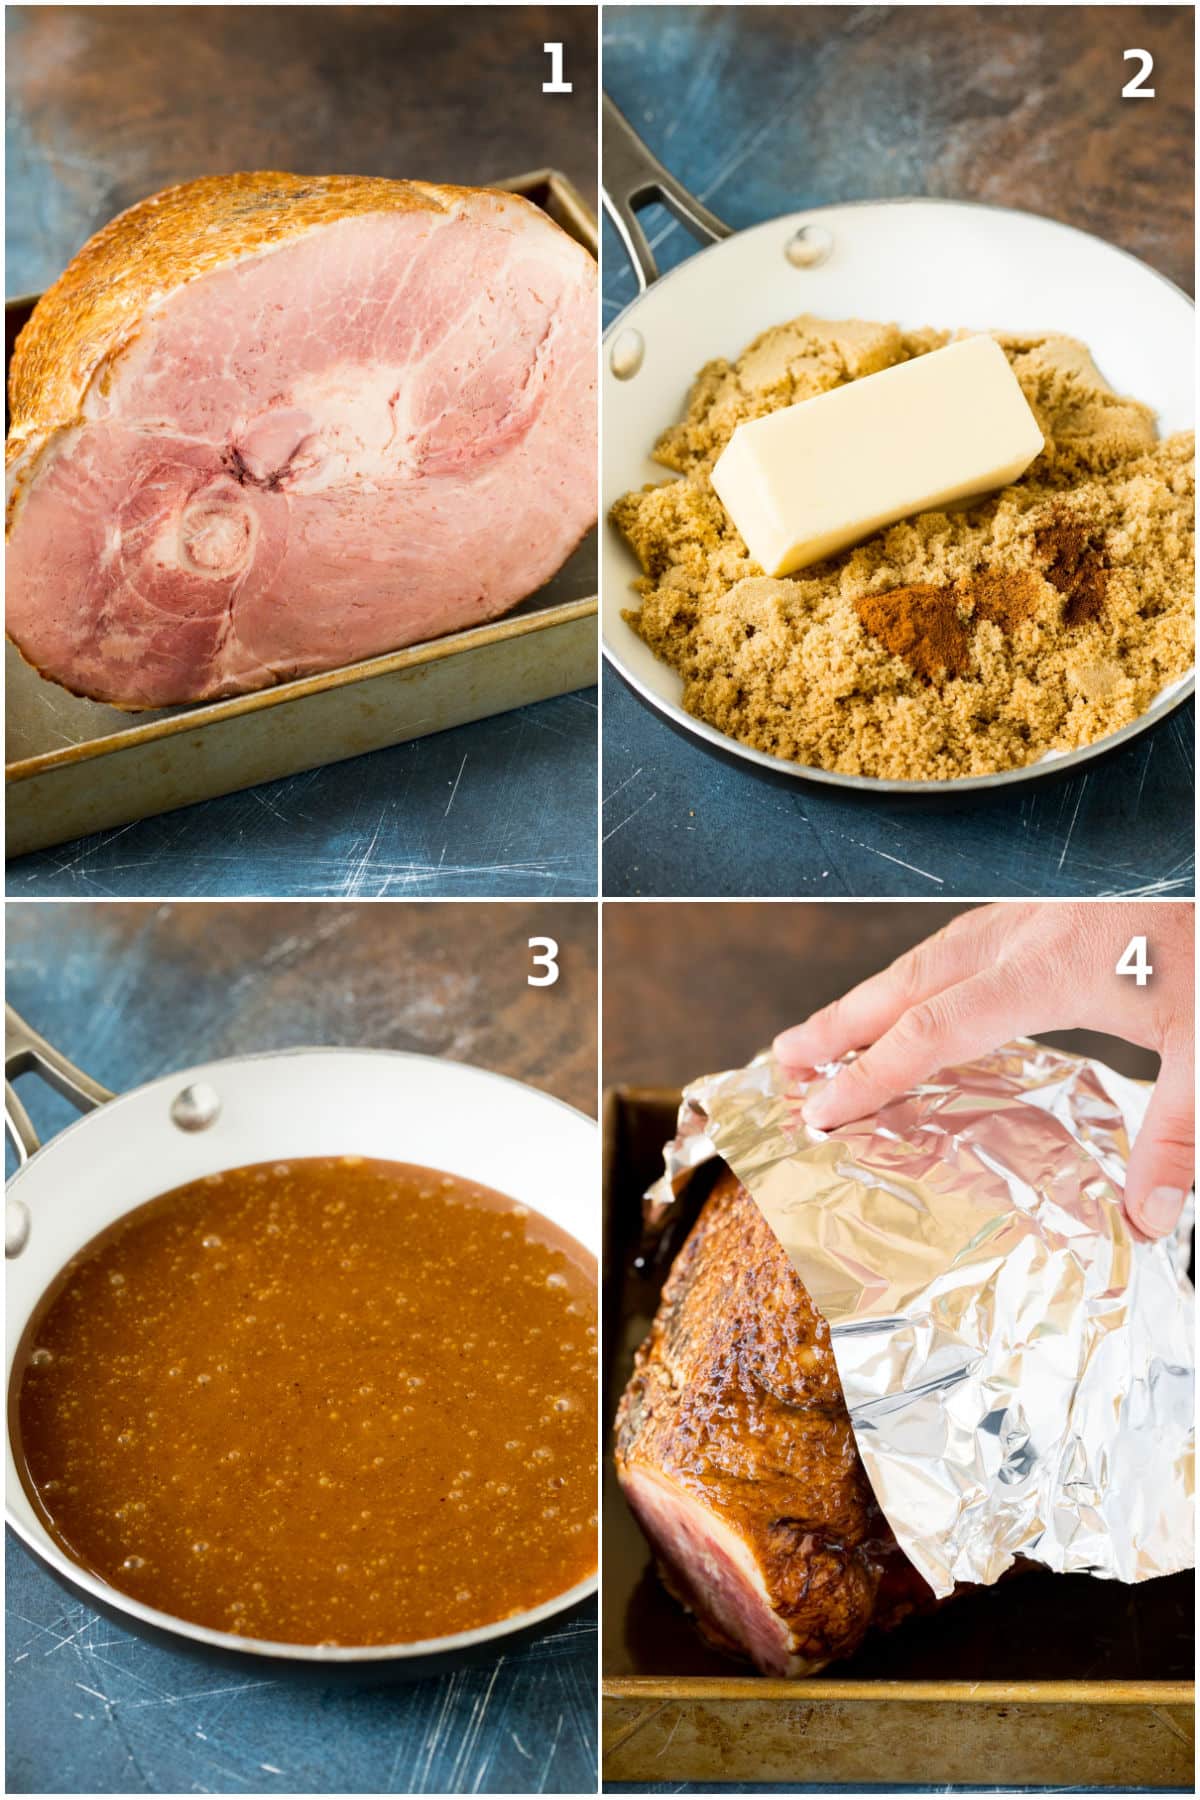 Step by step shots showing how to cook a ham.